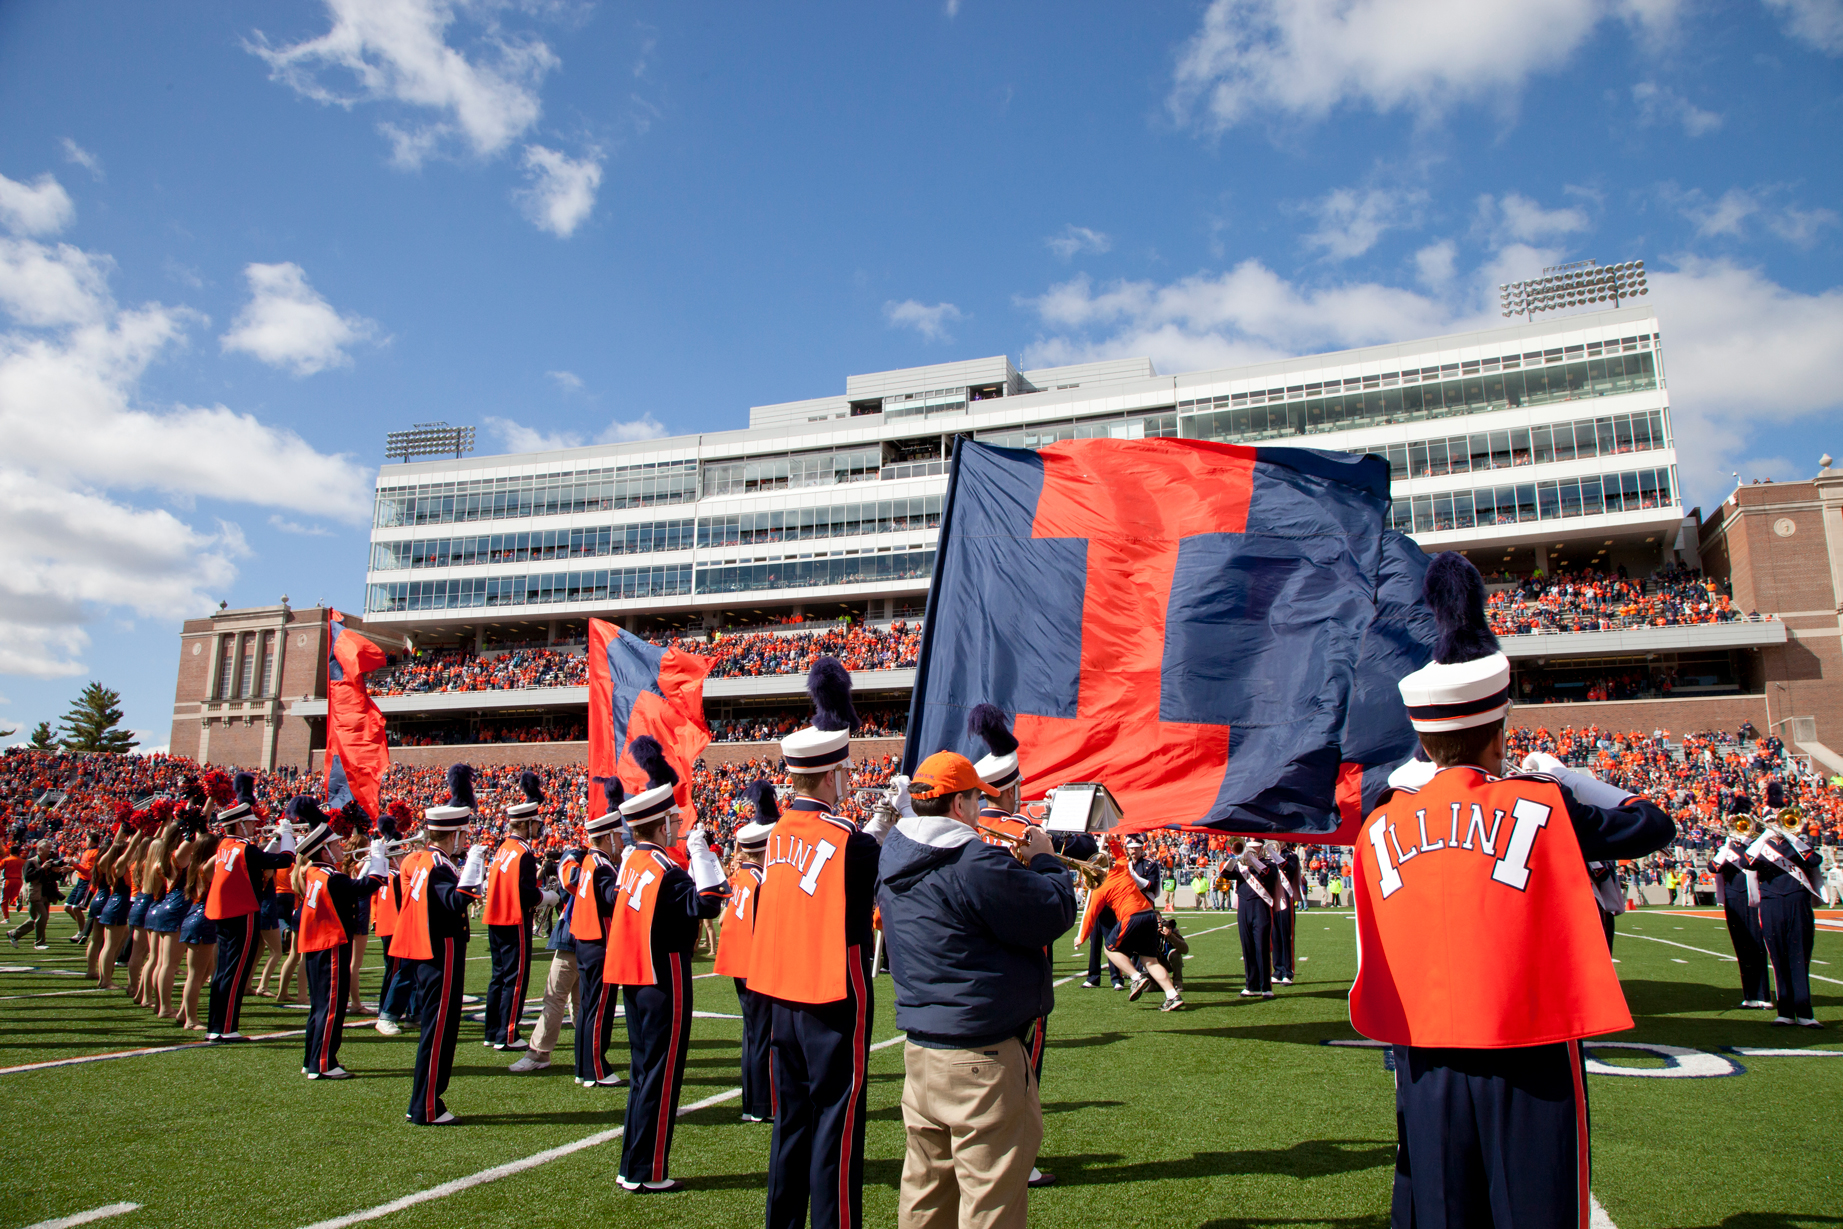 Students cheer at sporting event at The University of Illinois Urbana-Champaign